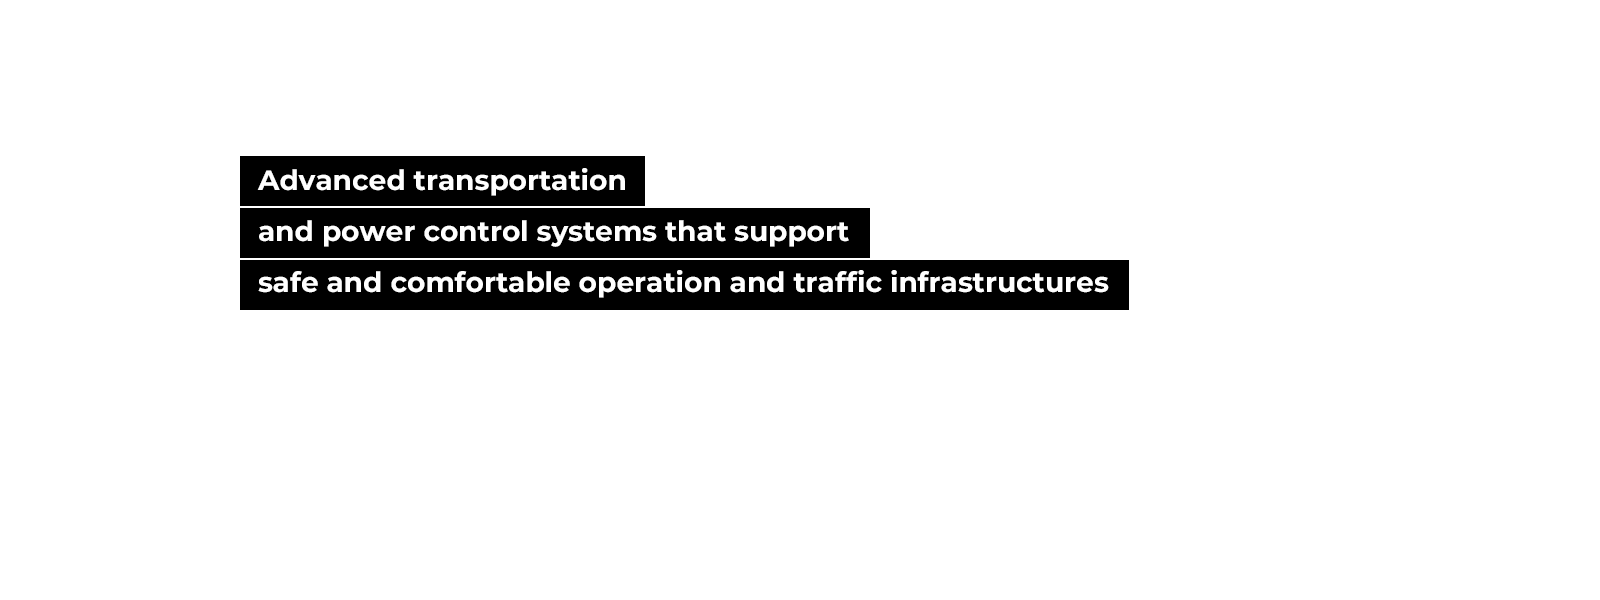 Advanced transportation and power control systems that support safe and comfortable operation and traffic infrastructures